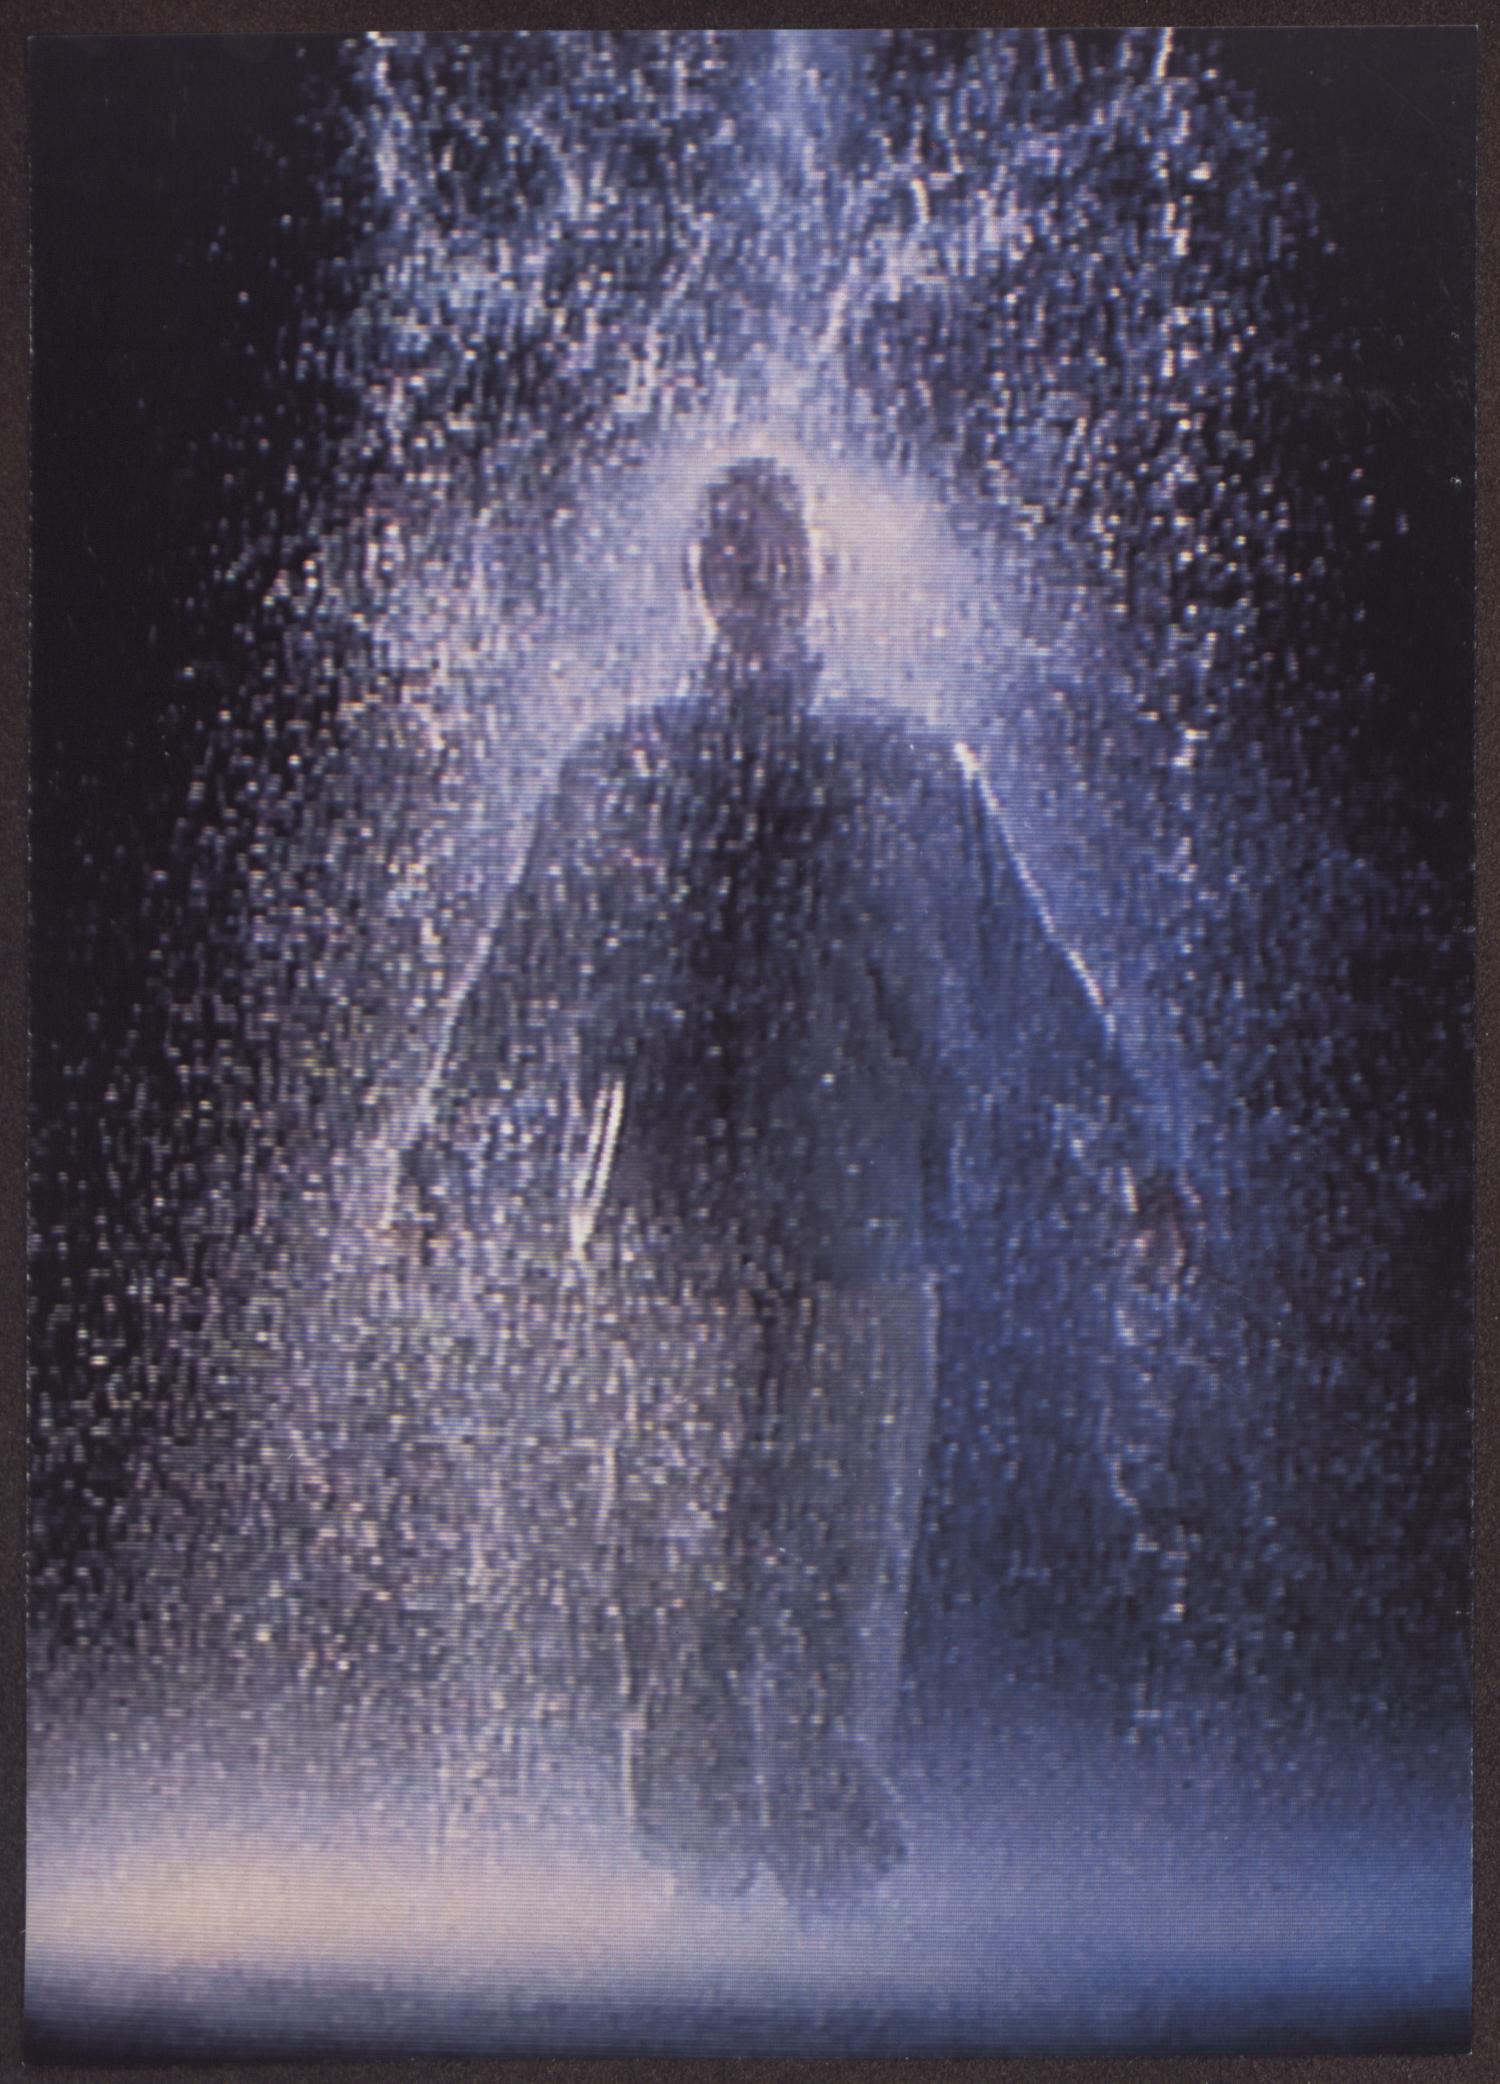 Bill Viola: "The Crossing"
                                                
                                                    [Sequence #]: 1 of 2
                                                